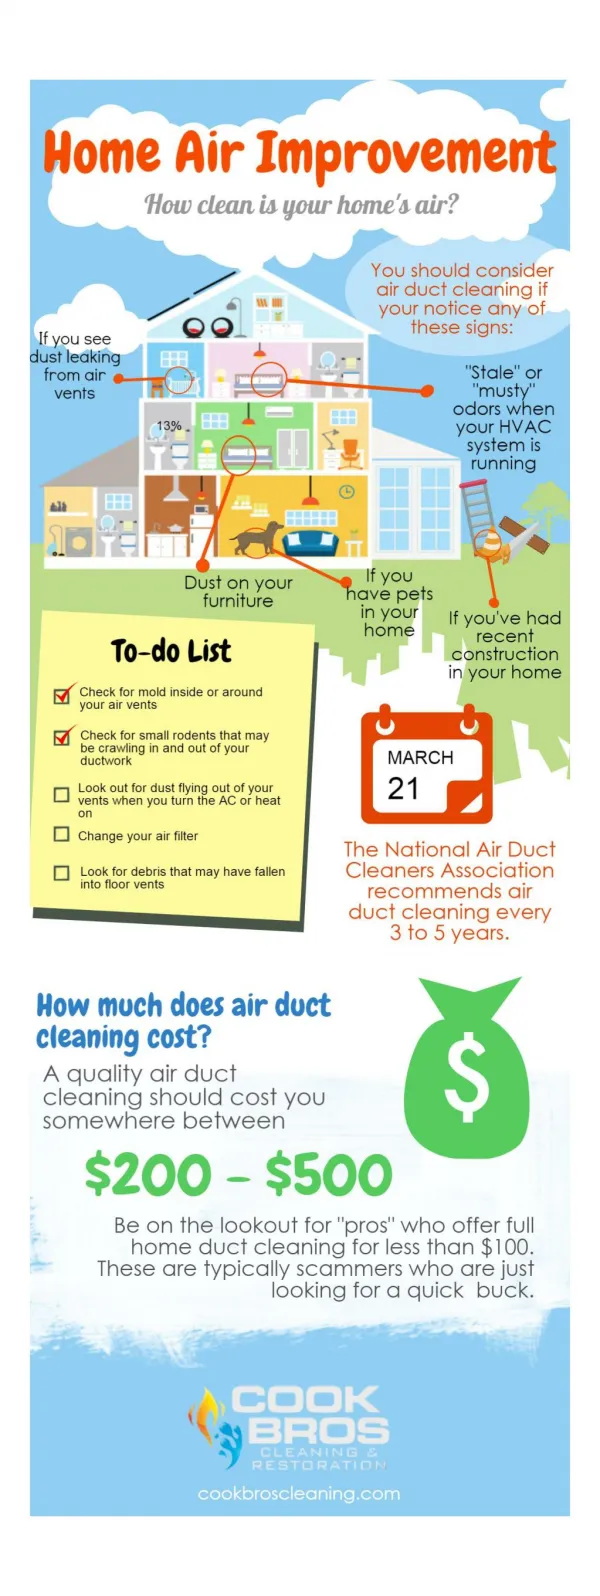 Does Your Home Need Air Duct Cleaning?